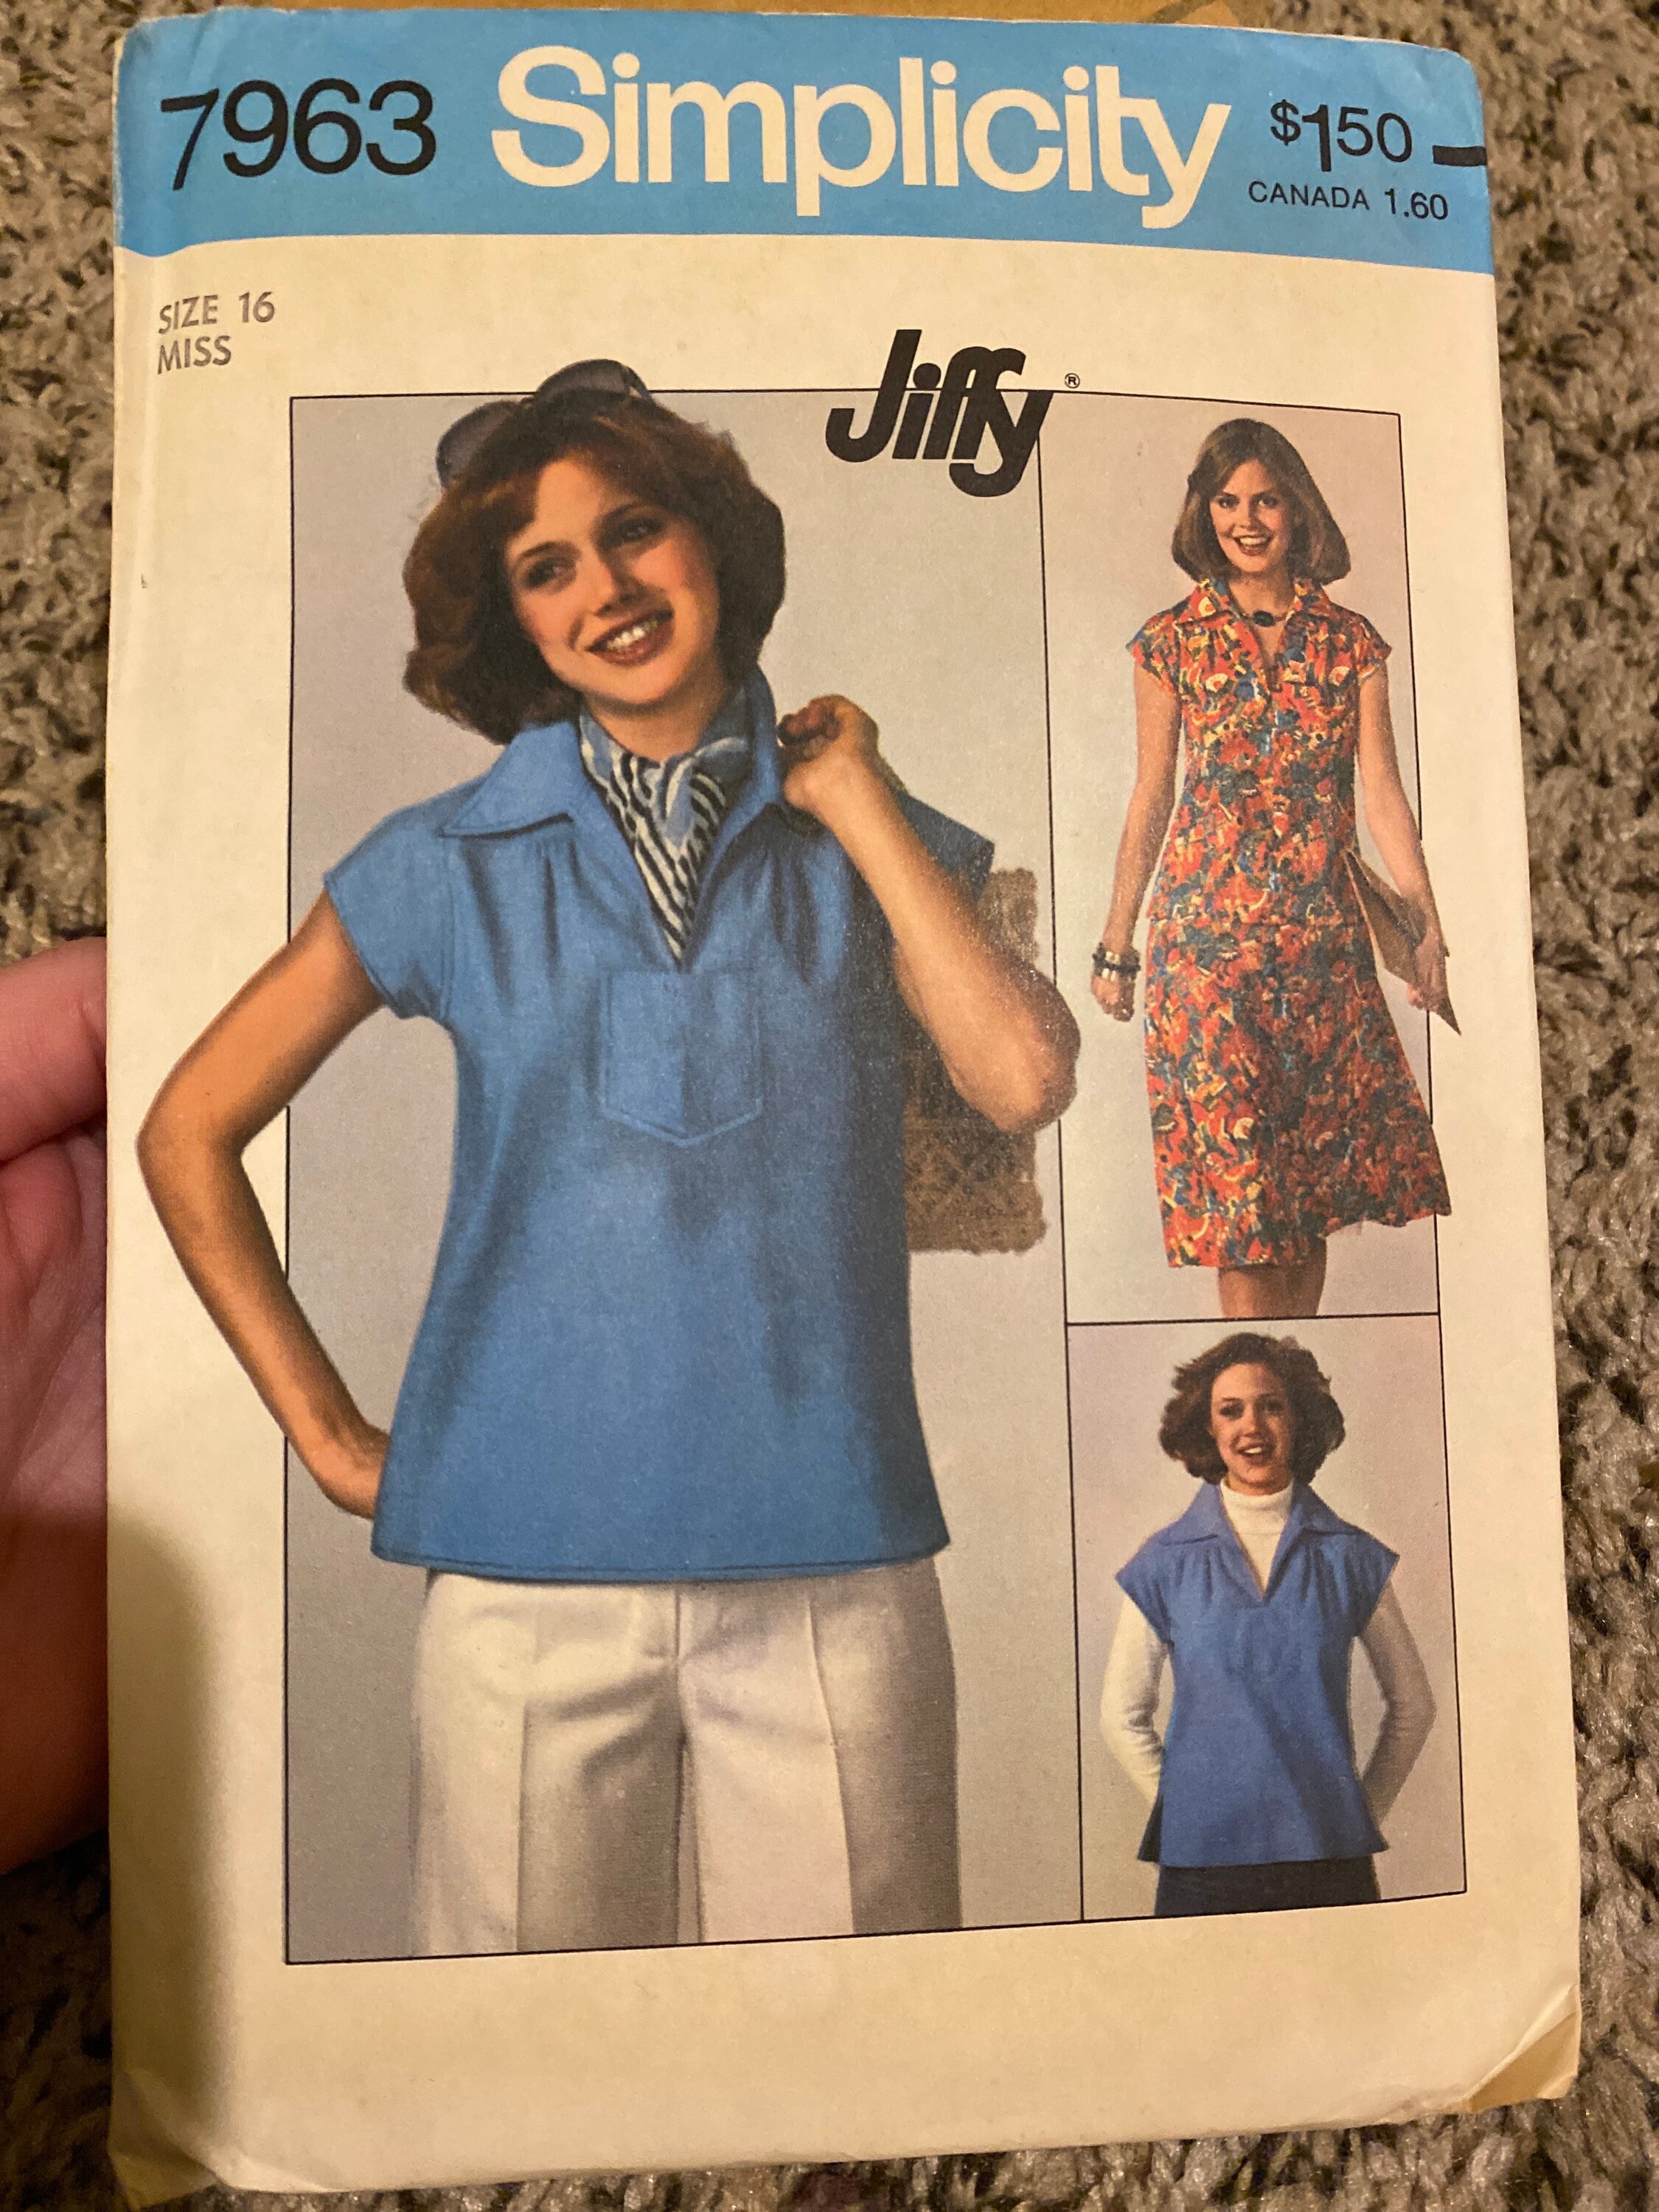 Jiffy Dress Sewing Pattern Simplicity 7963  Vintage 1970s  Misses Sewing Pattern Size 12 Bust 34